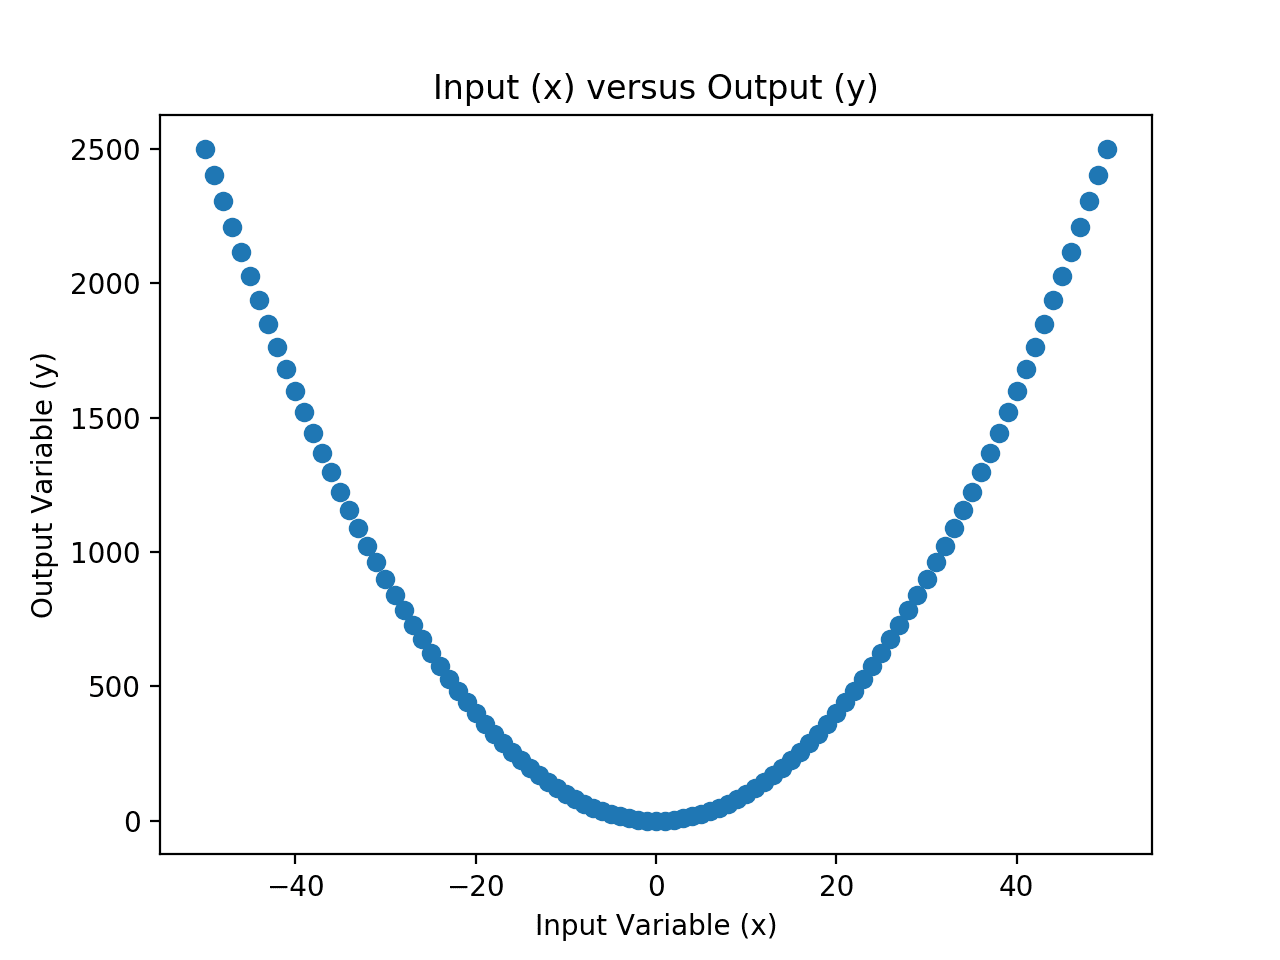 Scatter Plot of Input and Output Values for the Chosen Mapping Function